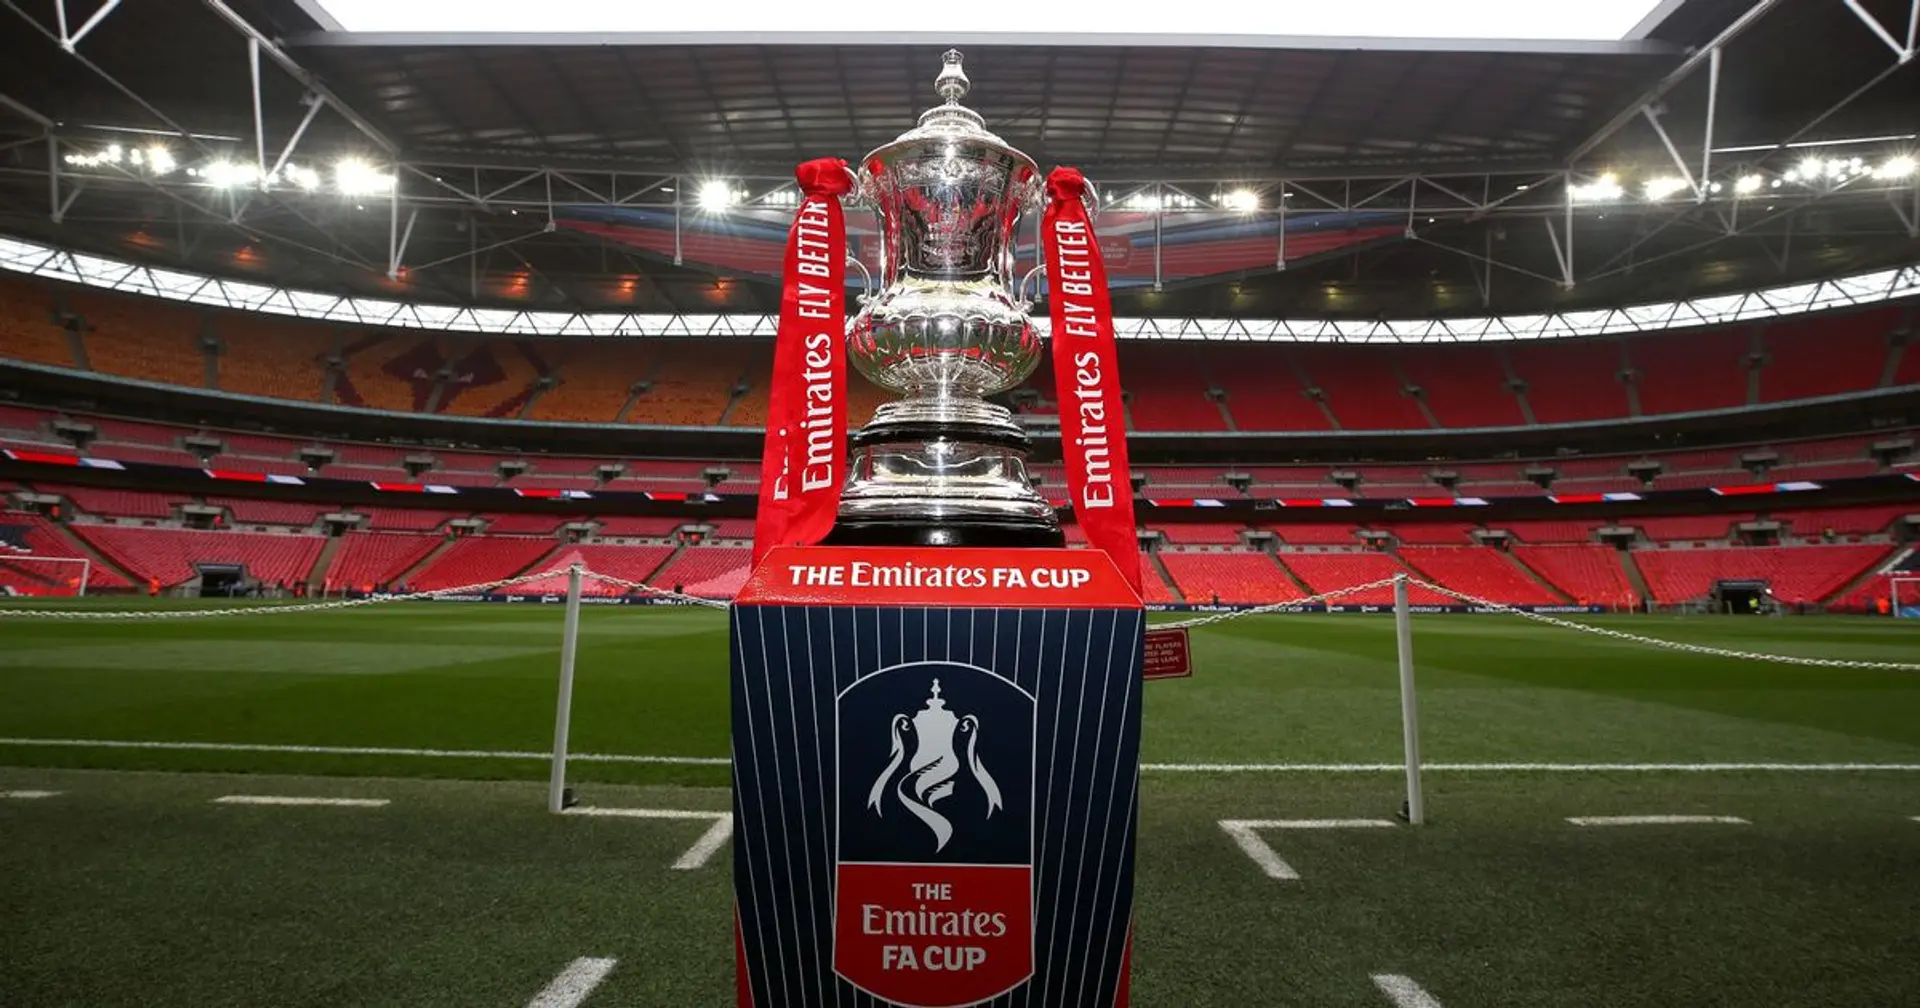 OFFICIAL: Man United to face West Ham or Doncaster in FA Cup 5th round if they beat Liverpool 